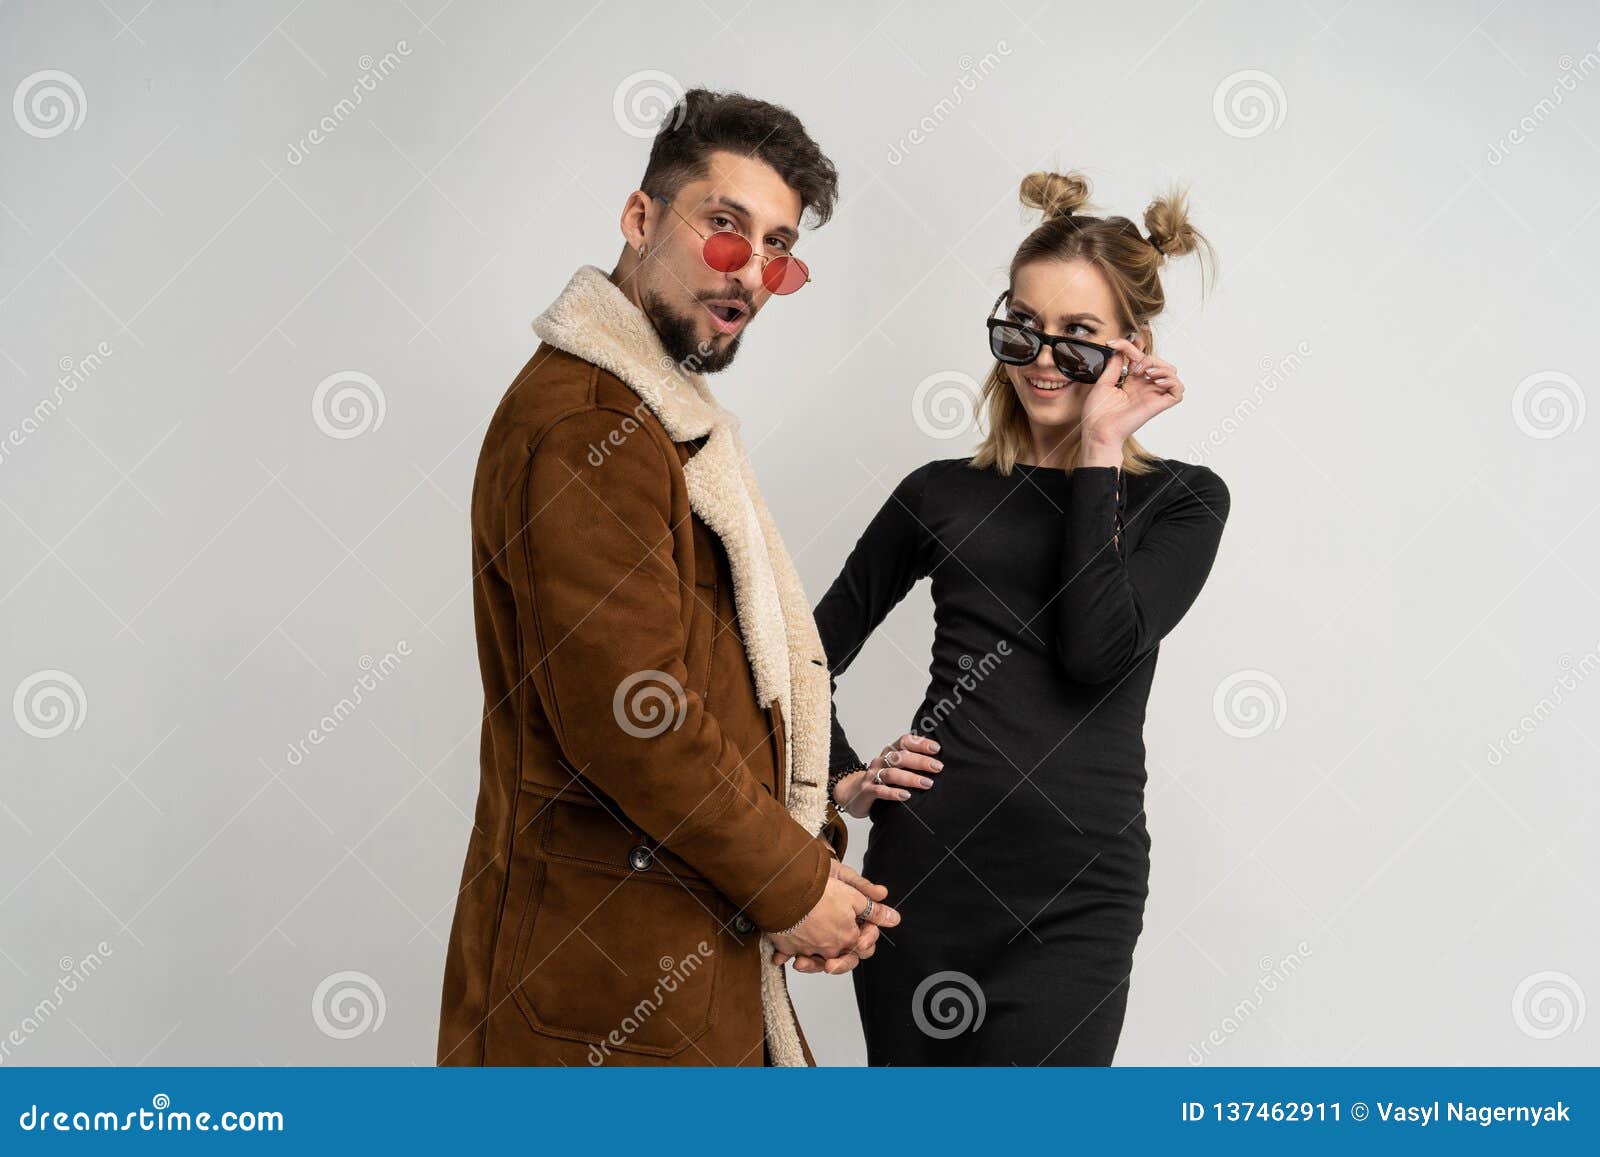 Young Couple Of Bearded Man In Coat And Pretty Woman In Black